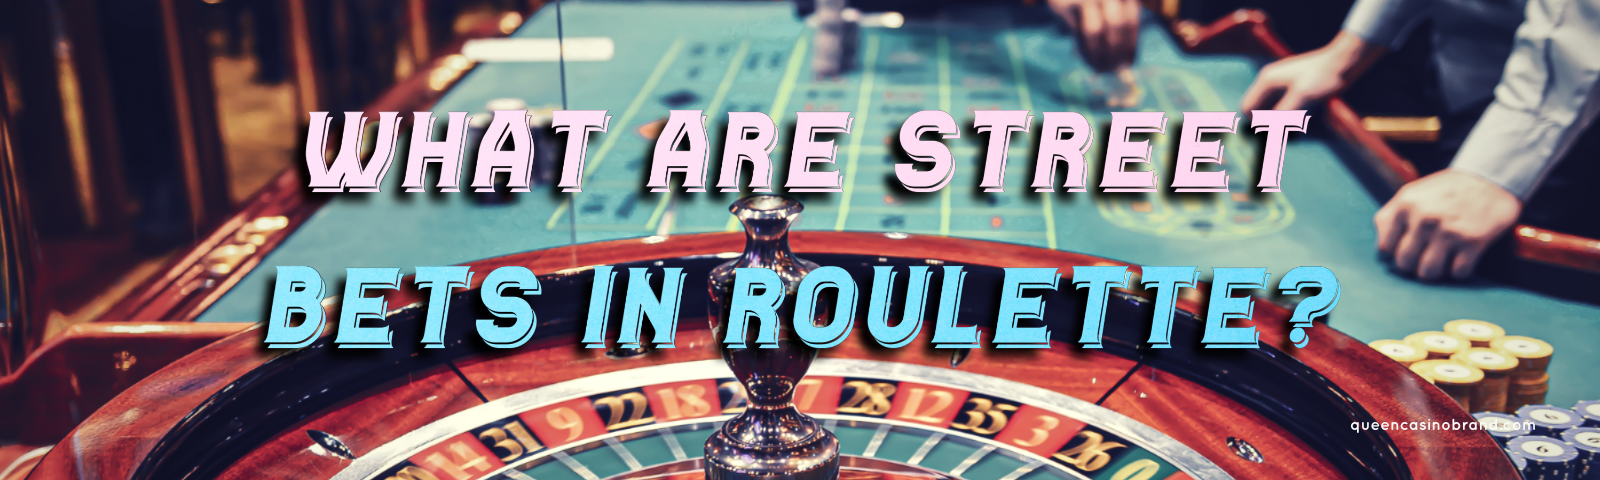 What are Street Bets in Roulette? | Queen Casino Brand